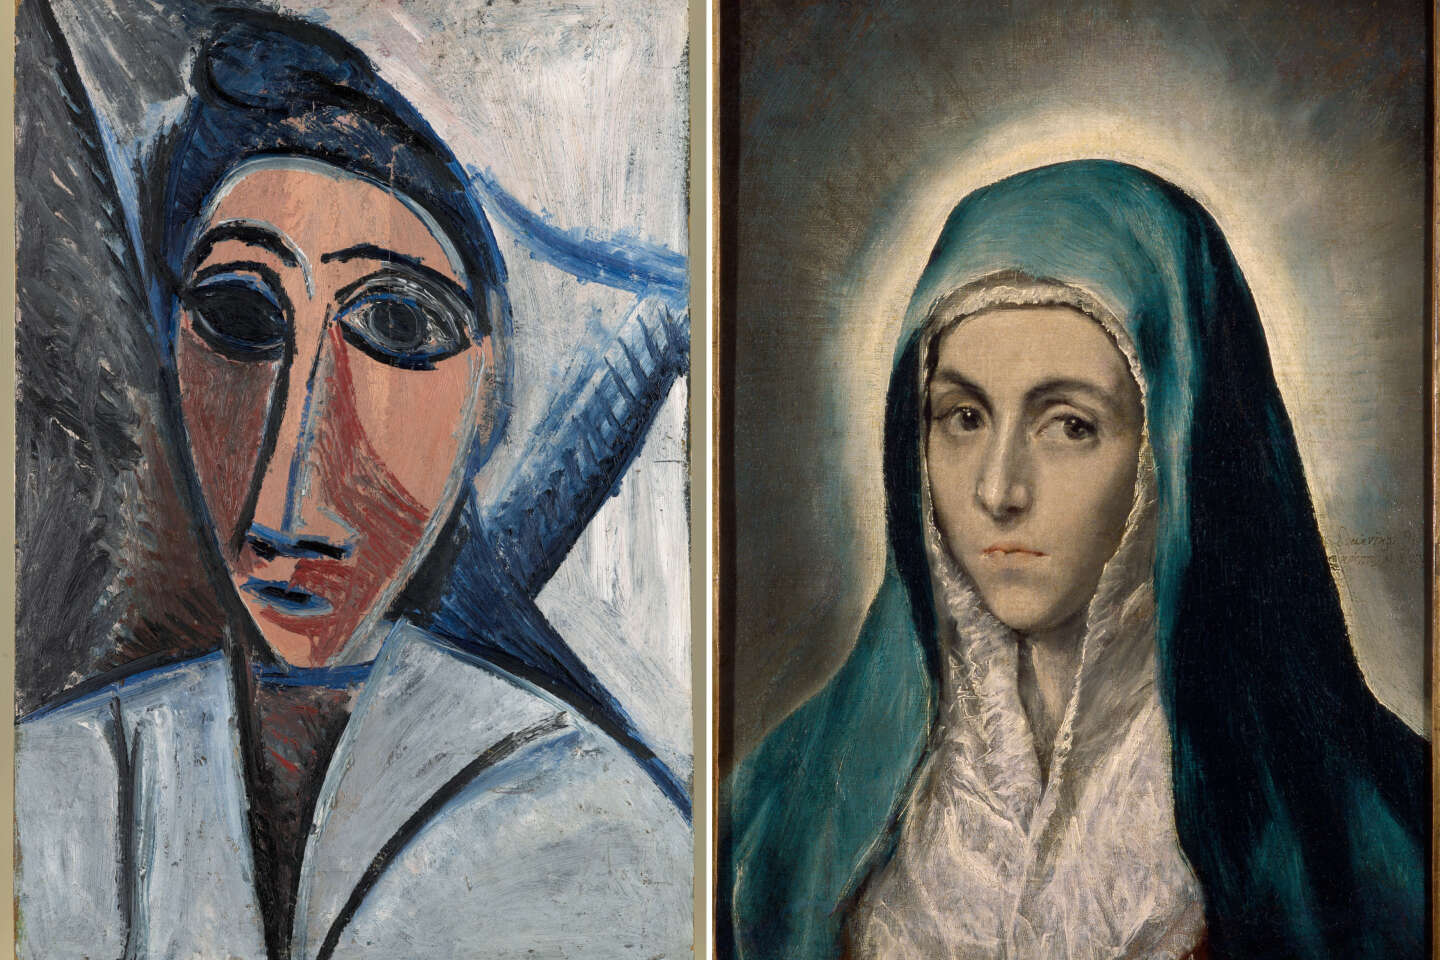 The luminous affinity between Picasso and El Greco